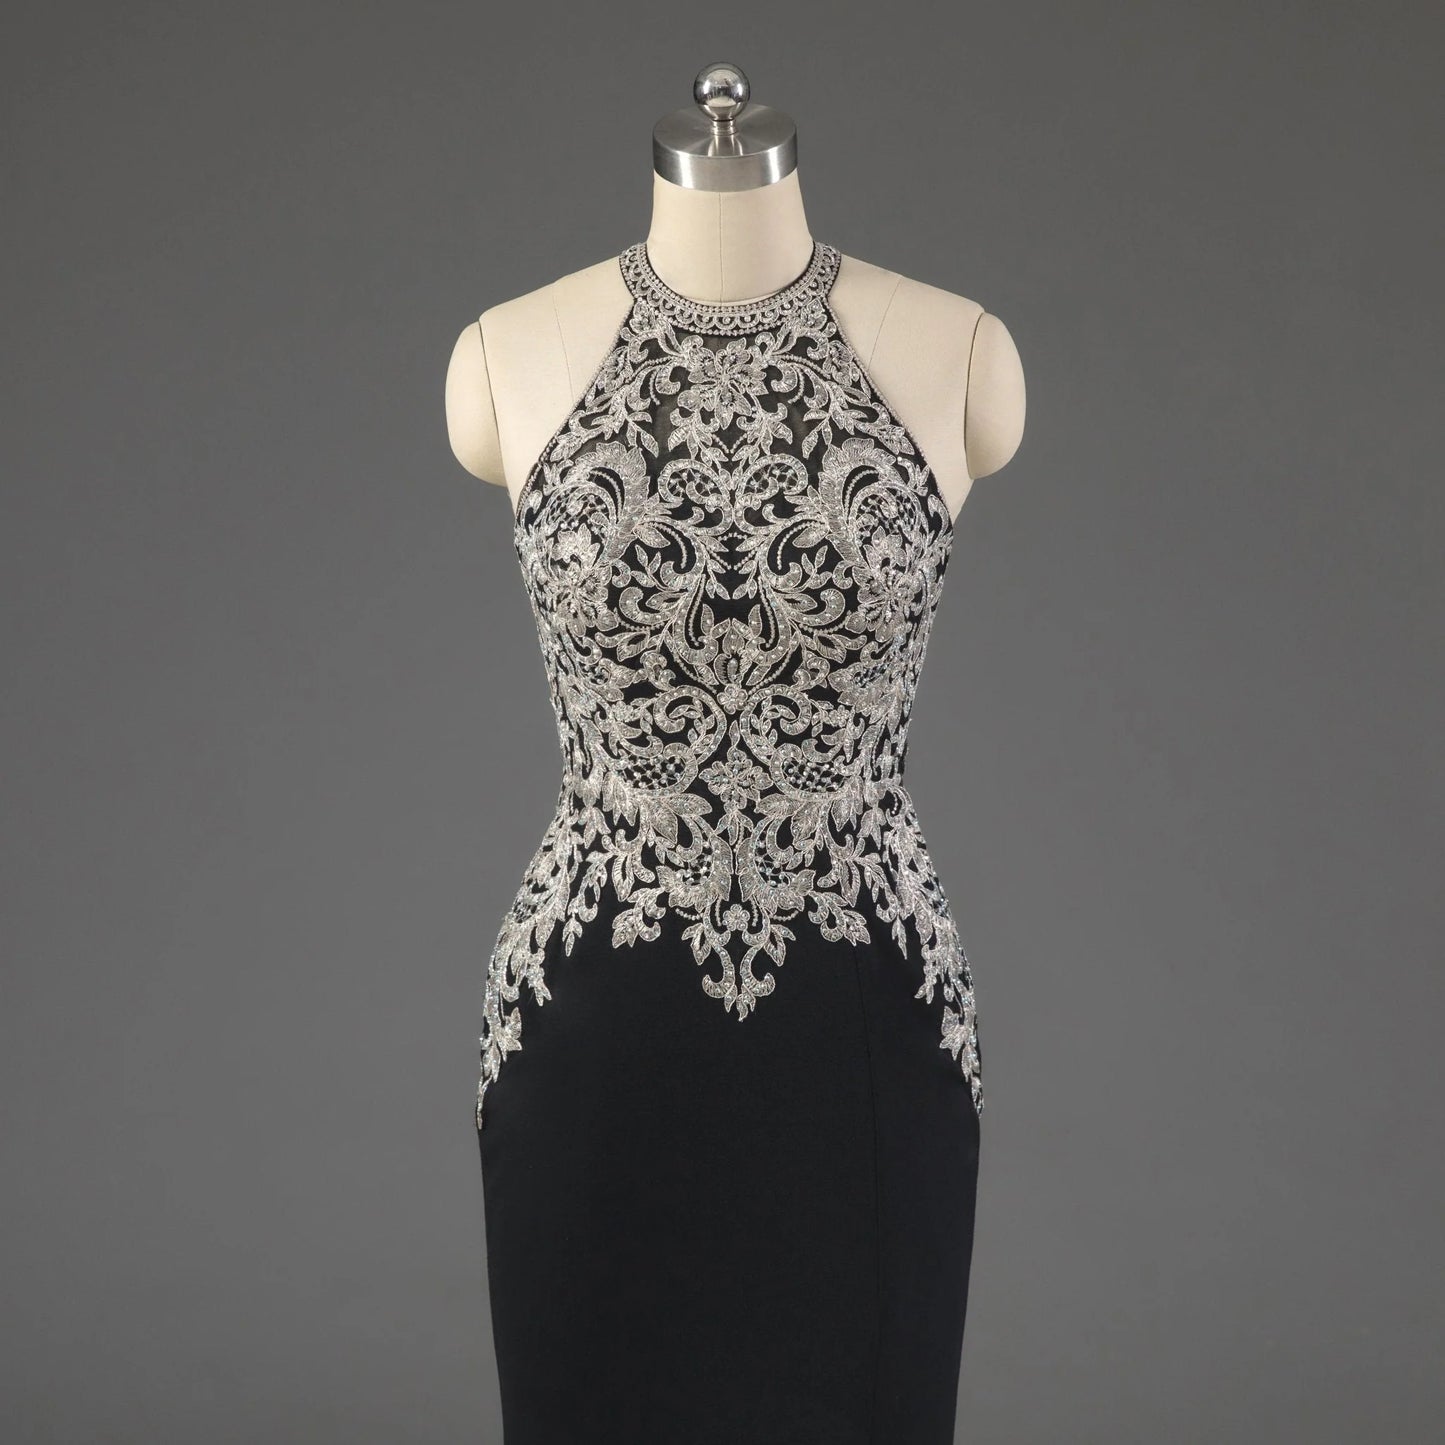 Black Memaid Halter Open Back Mother Of The Bride Dresses With Appliques